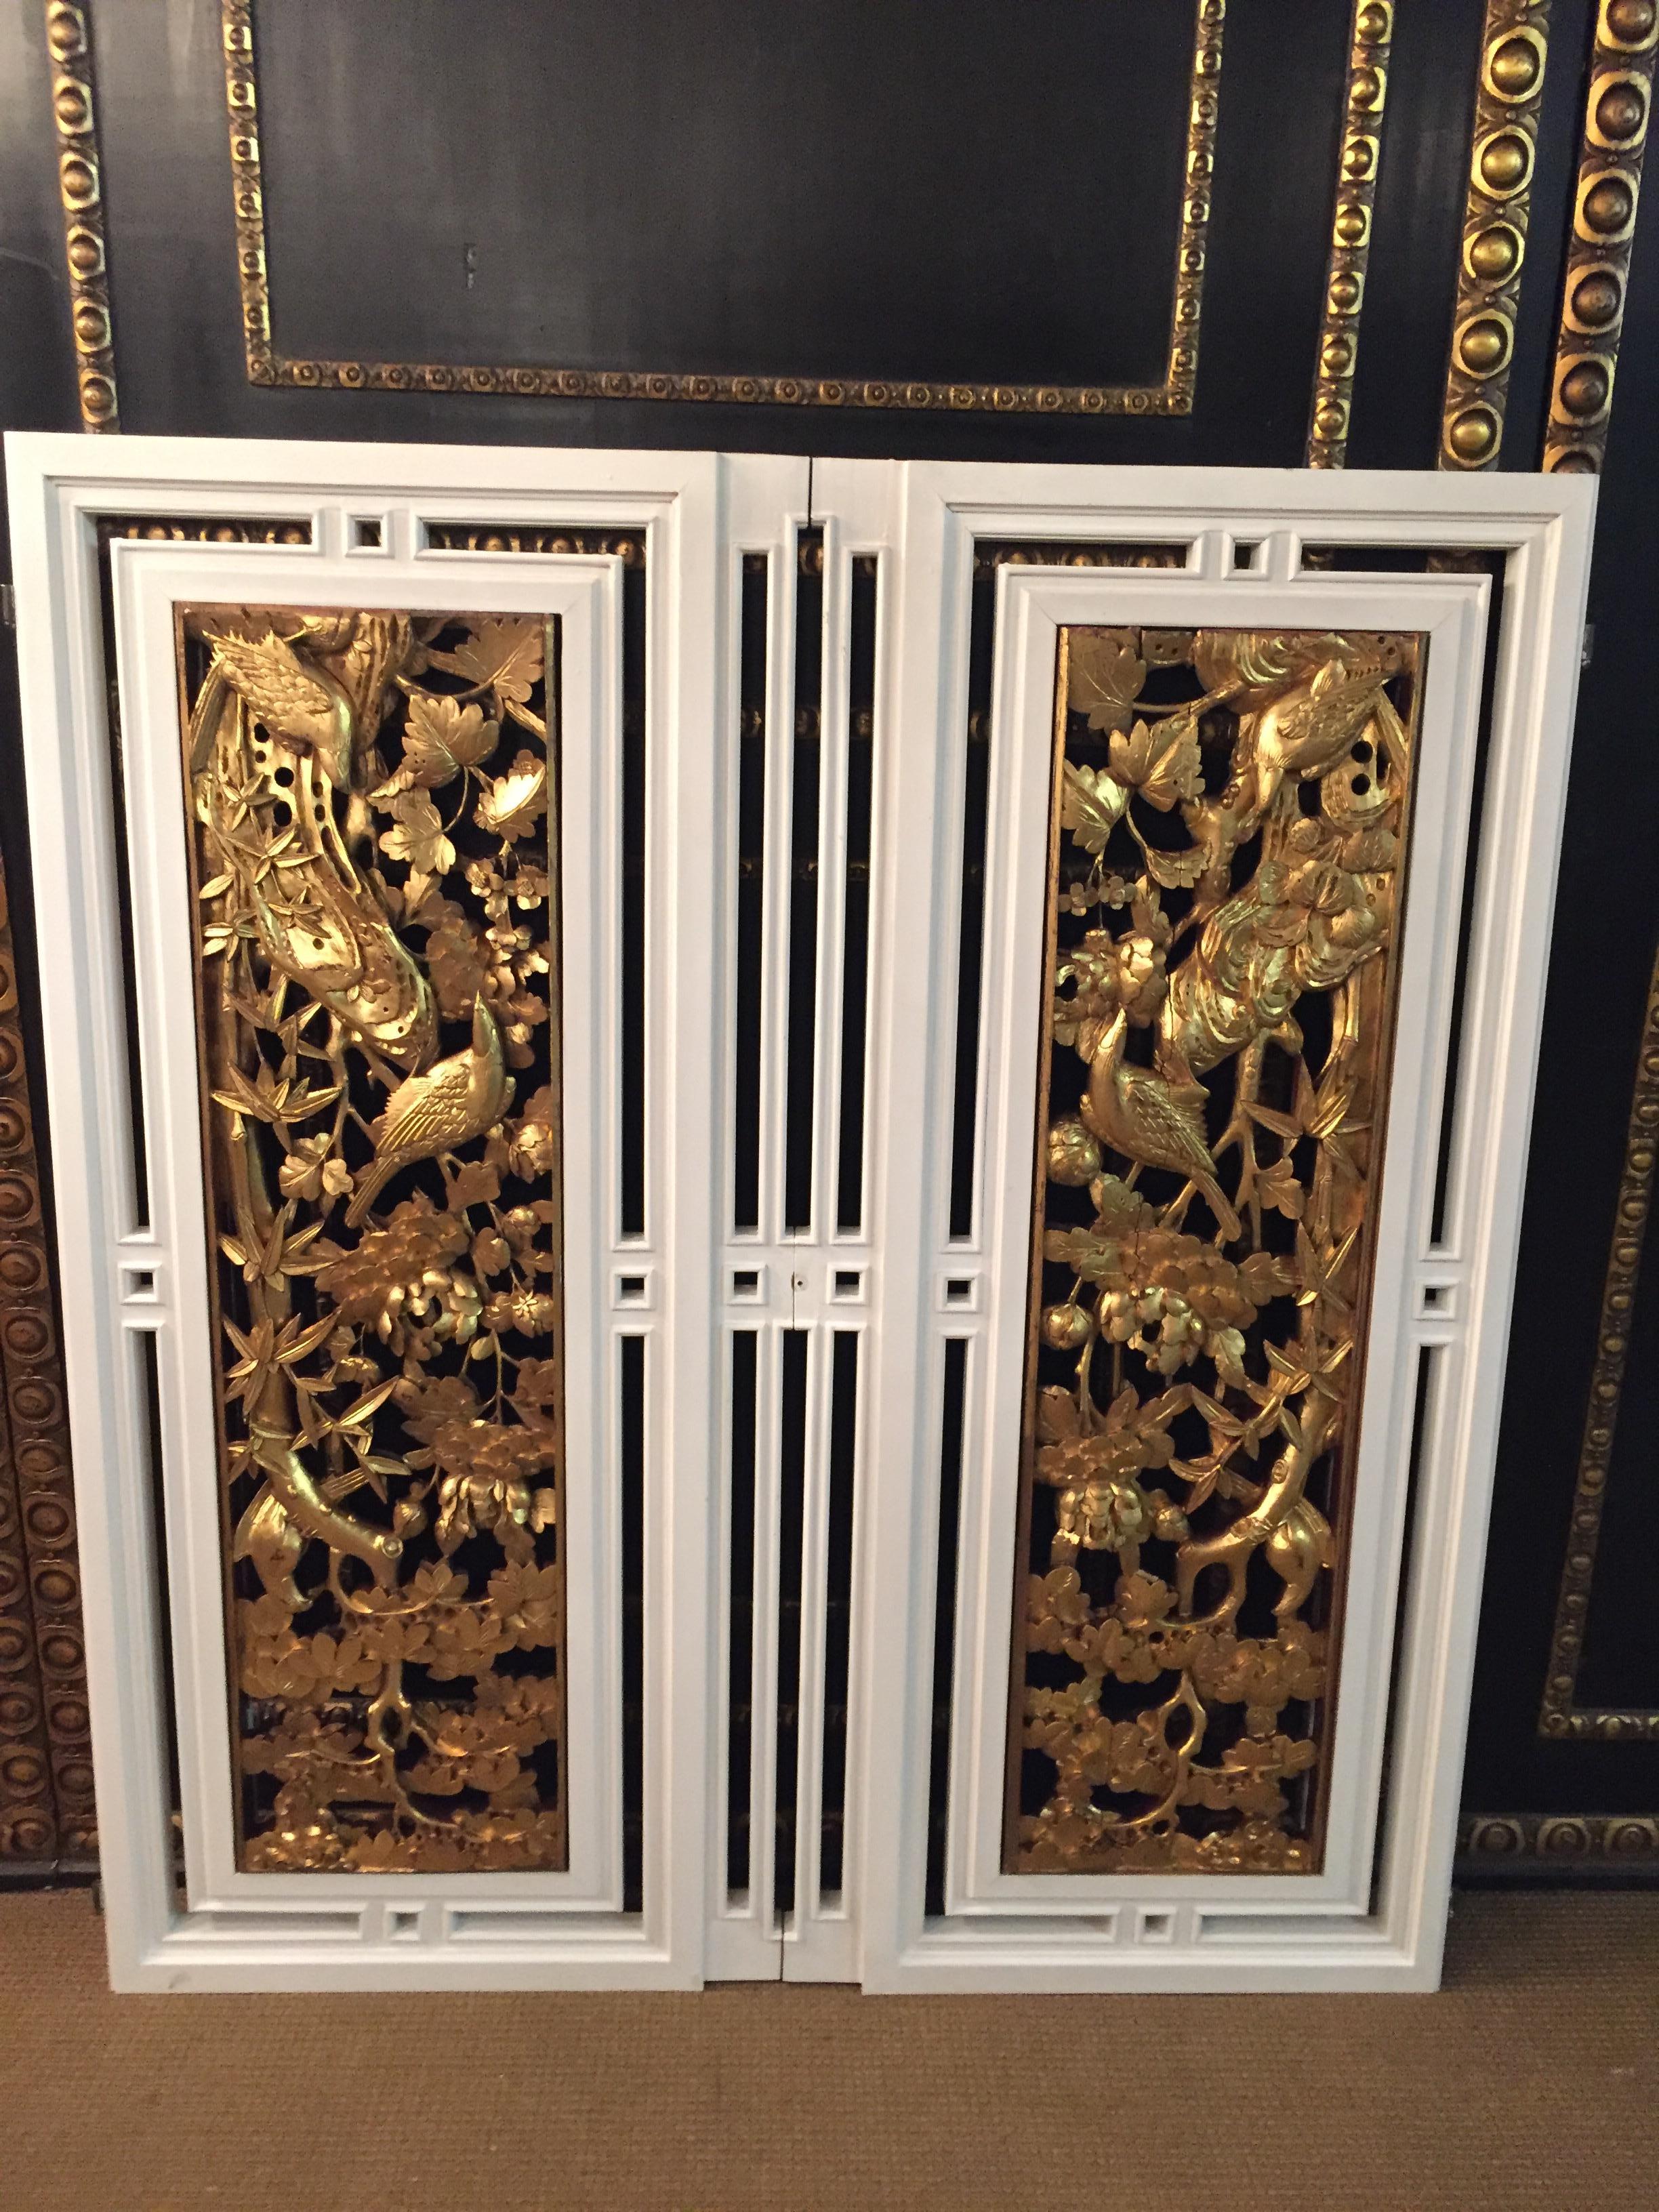 2 beautiful window doors with carved birds gilded solid wood.
You can also use them as panels.